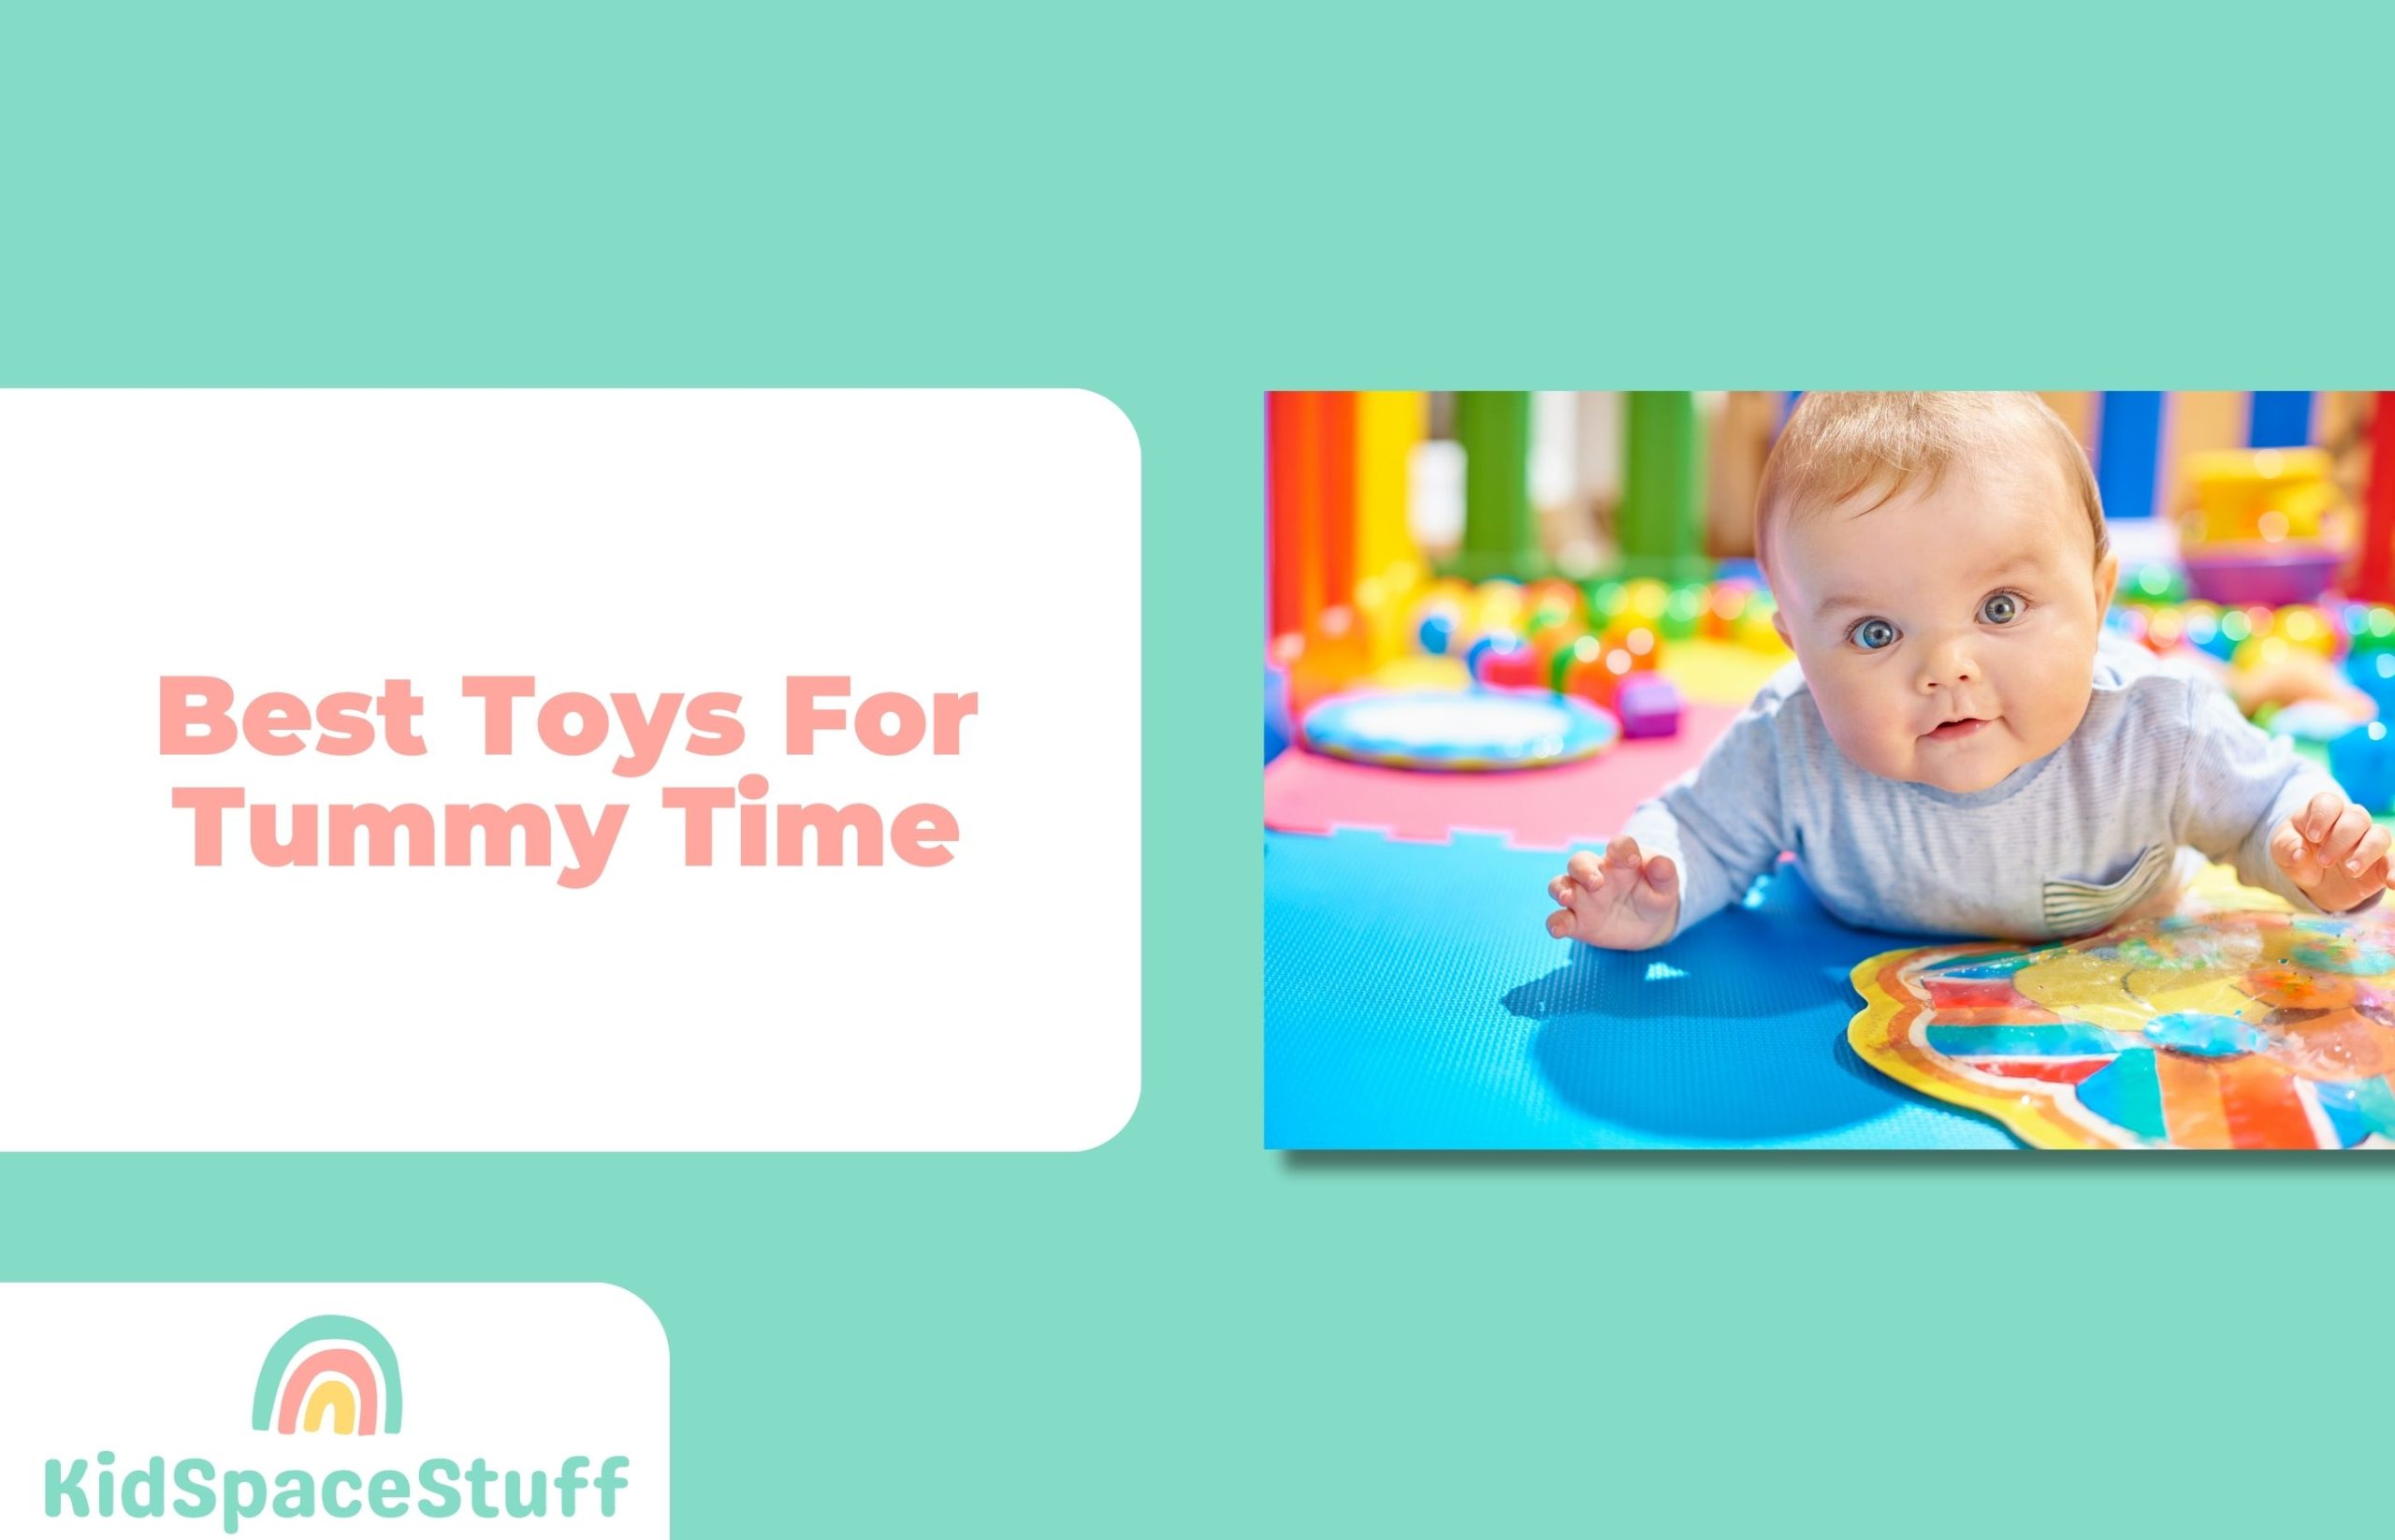 5 Best Toys for Tummy Time (2023 Guide)